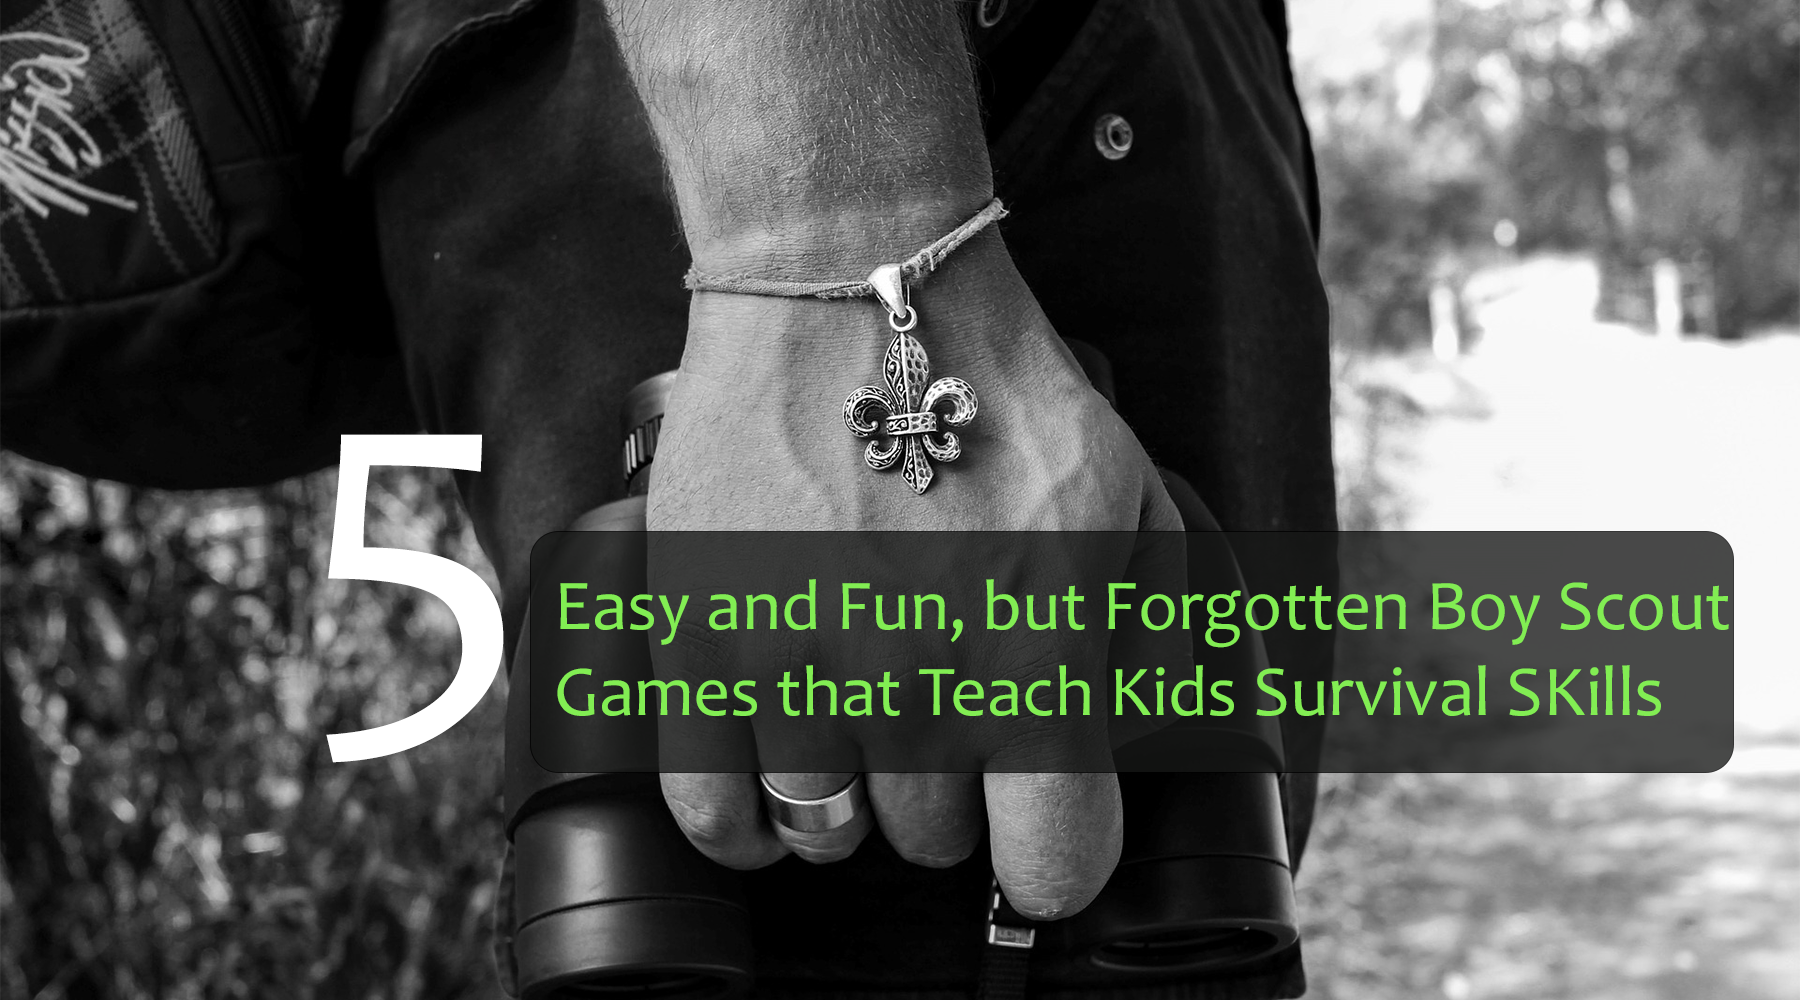 5 Easy and Fun, but Forgotten Boy Scout Games that Teach Kids Survival Skills